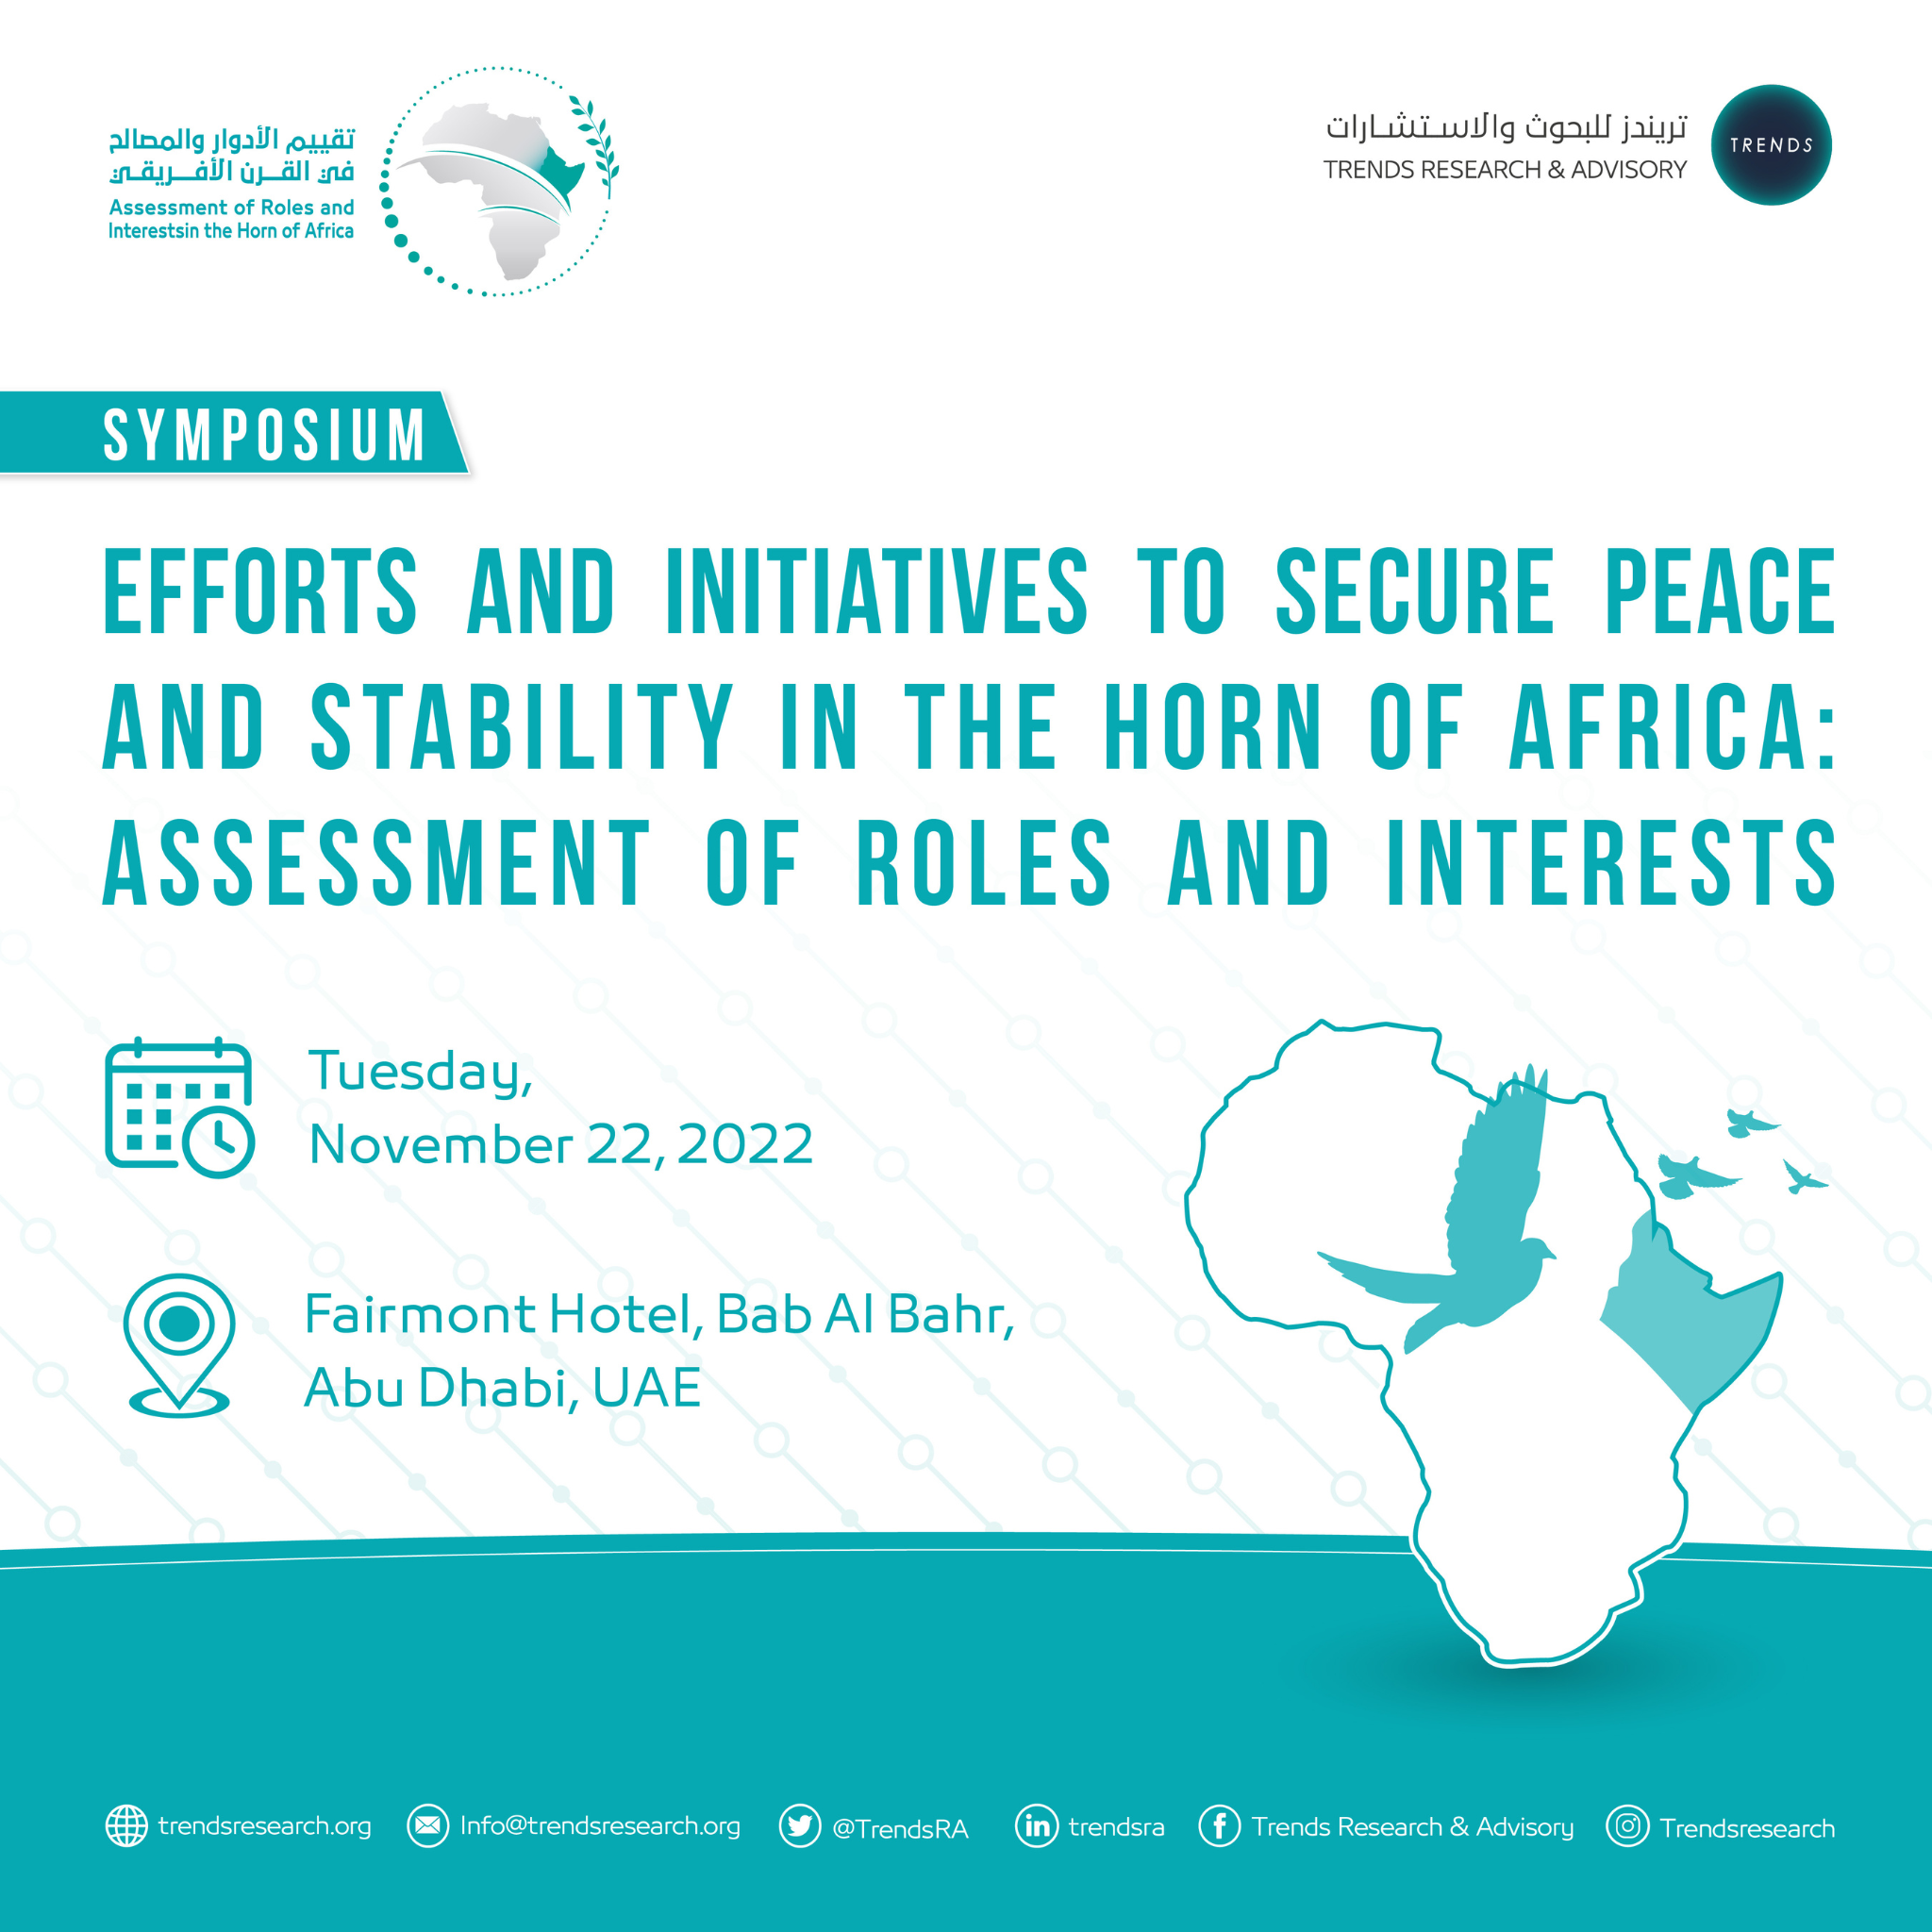 Efforts and Initiative to Secure Peace and Stability in the Horn of Africa: Assessment of Roles and Interests